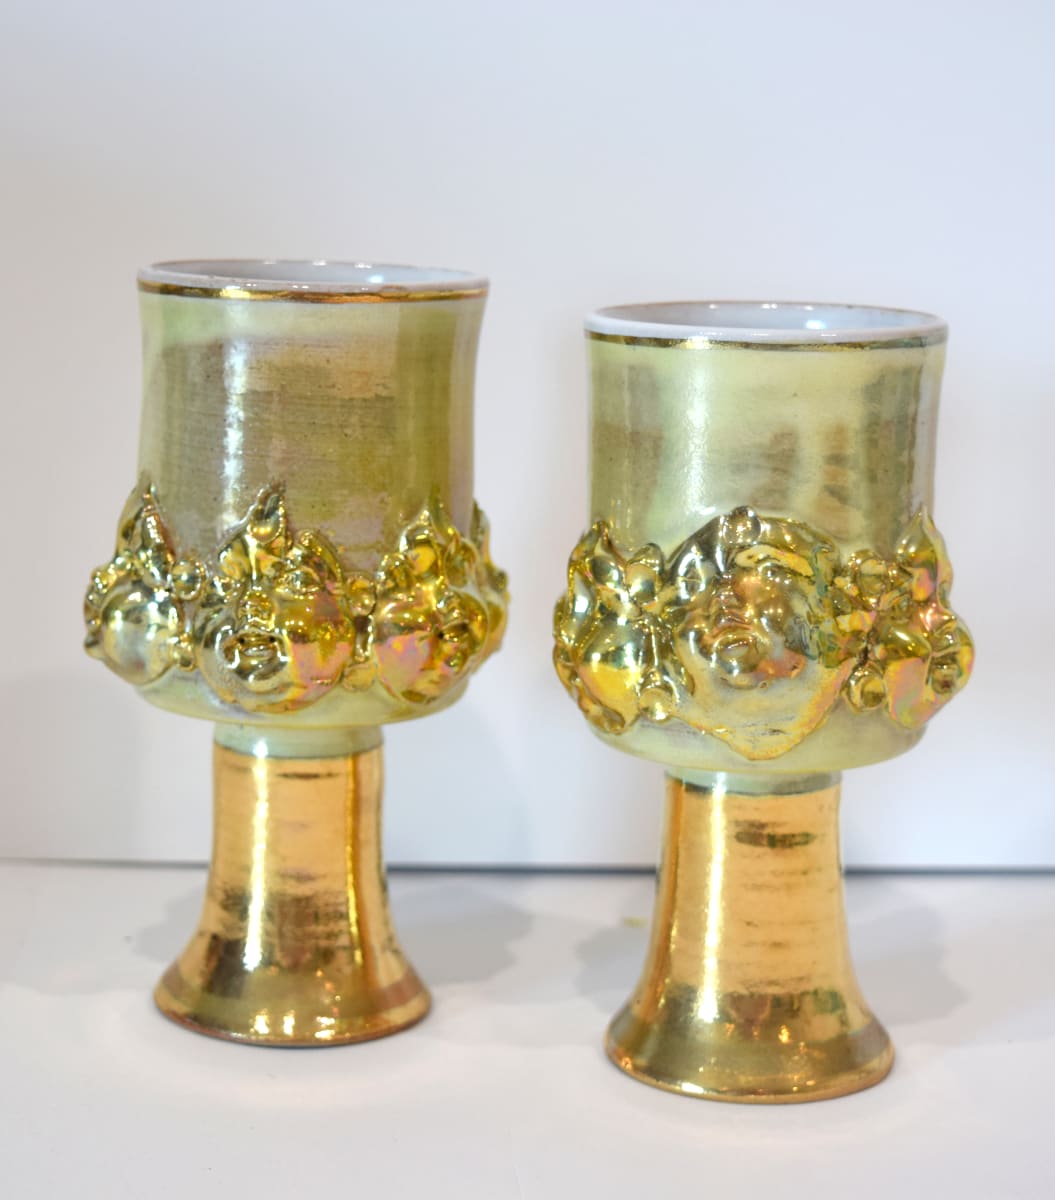 Goblets with Cherub Faces by John Heller  Image: Goblets with Cherub Faces by John Heller